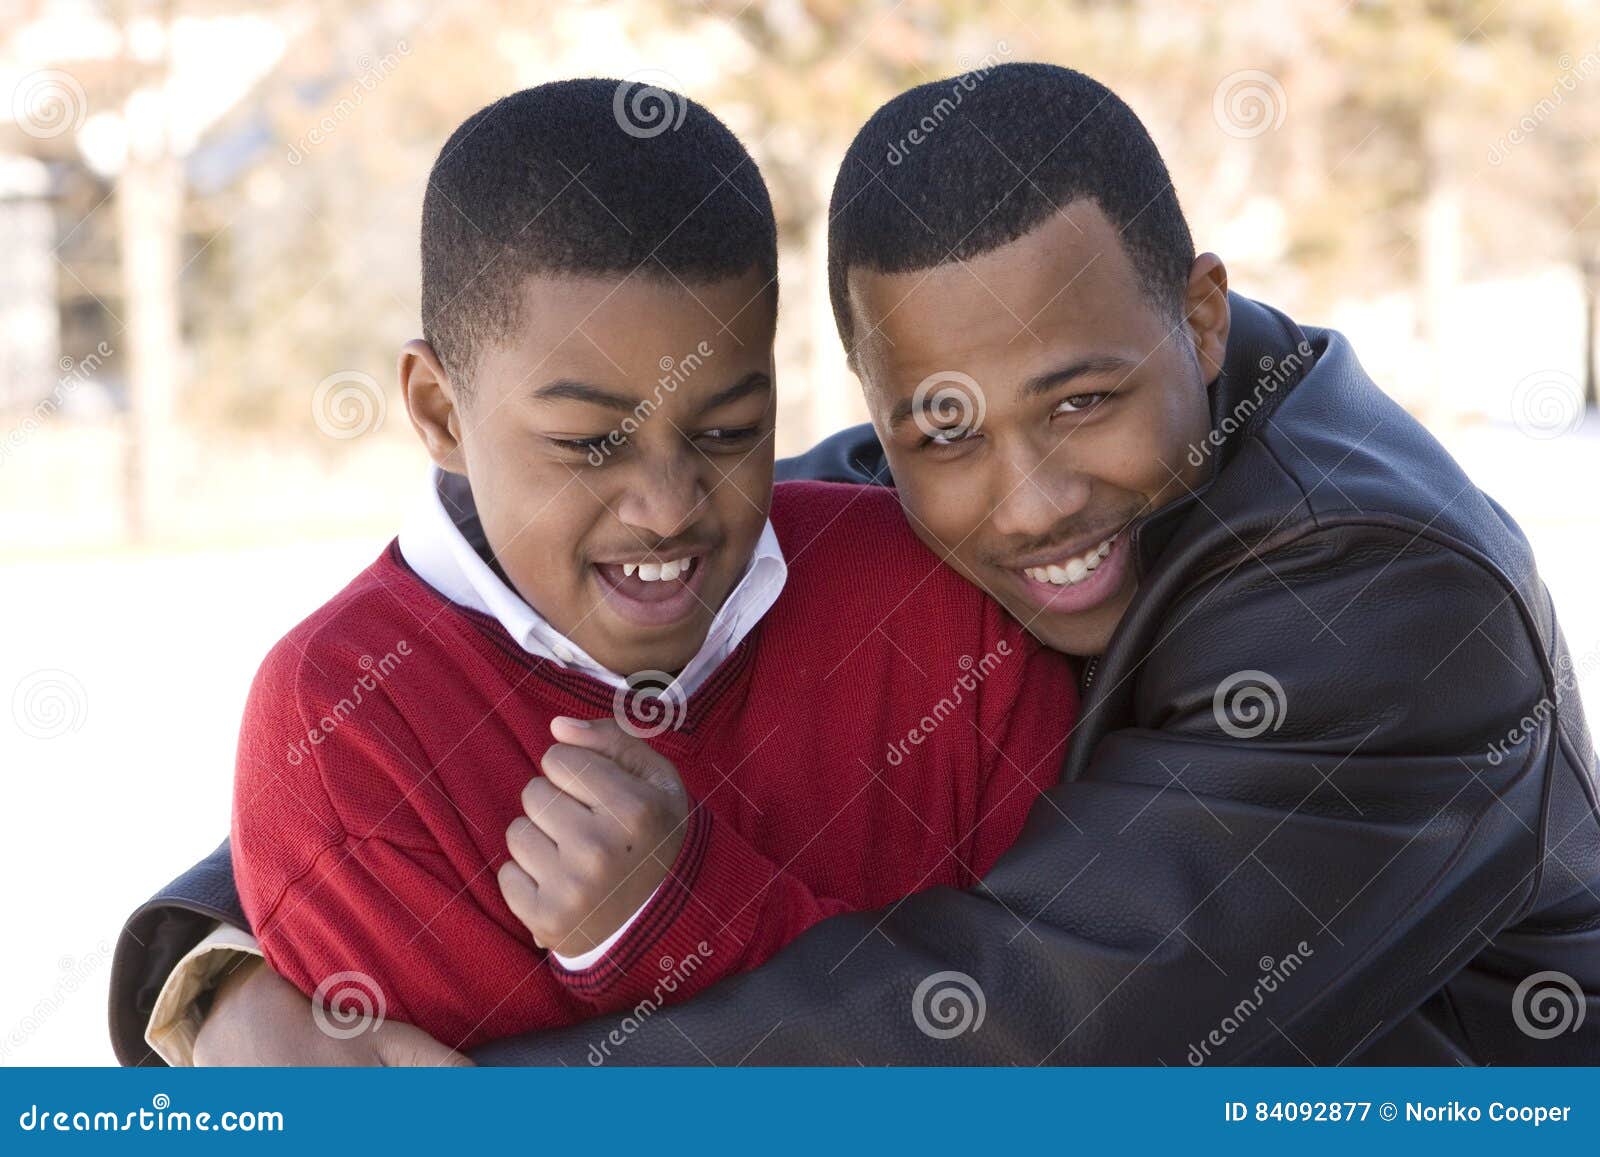 portrait of african american teenage brothers smiling.